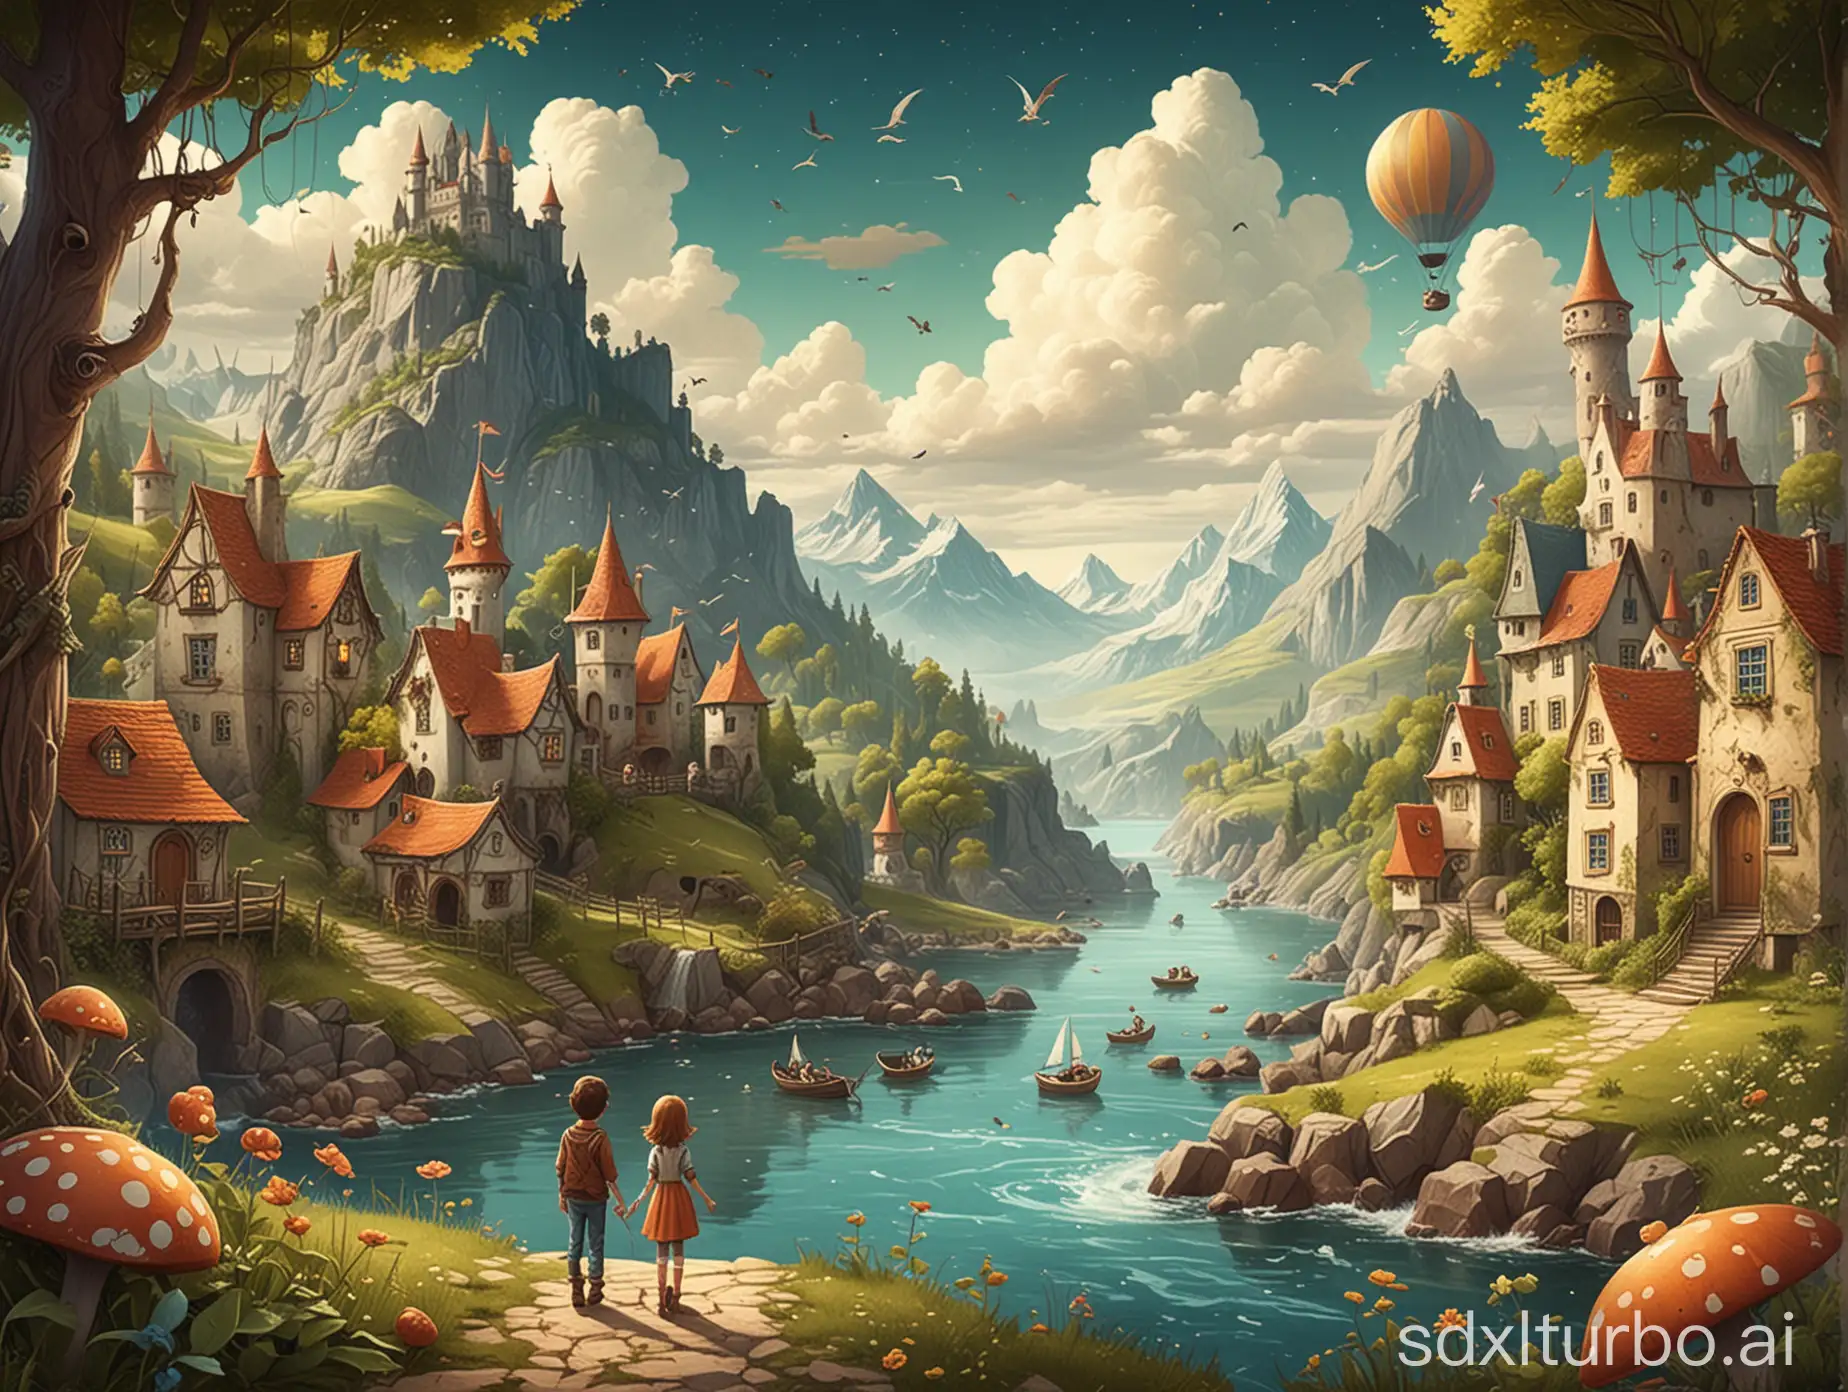 Whimsical-Characters-and-Fantastical-Landscapes-in-a-Magical-Childrens-Book